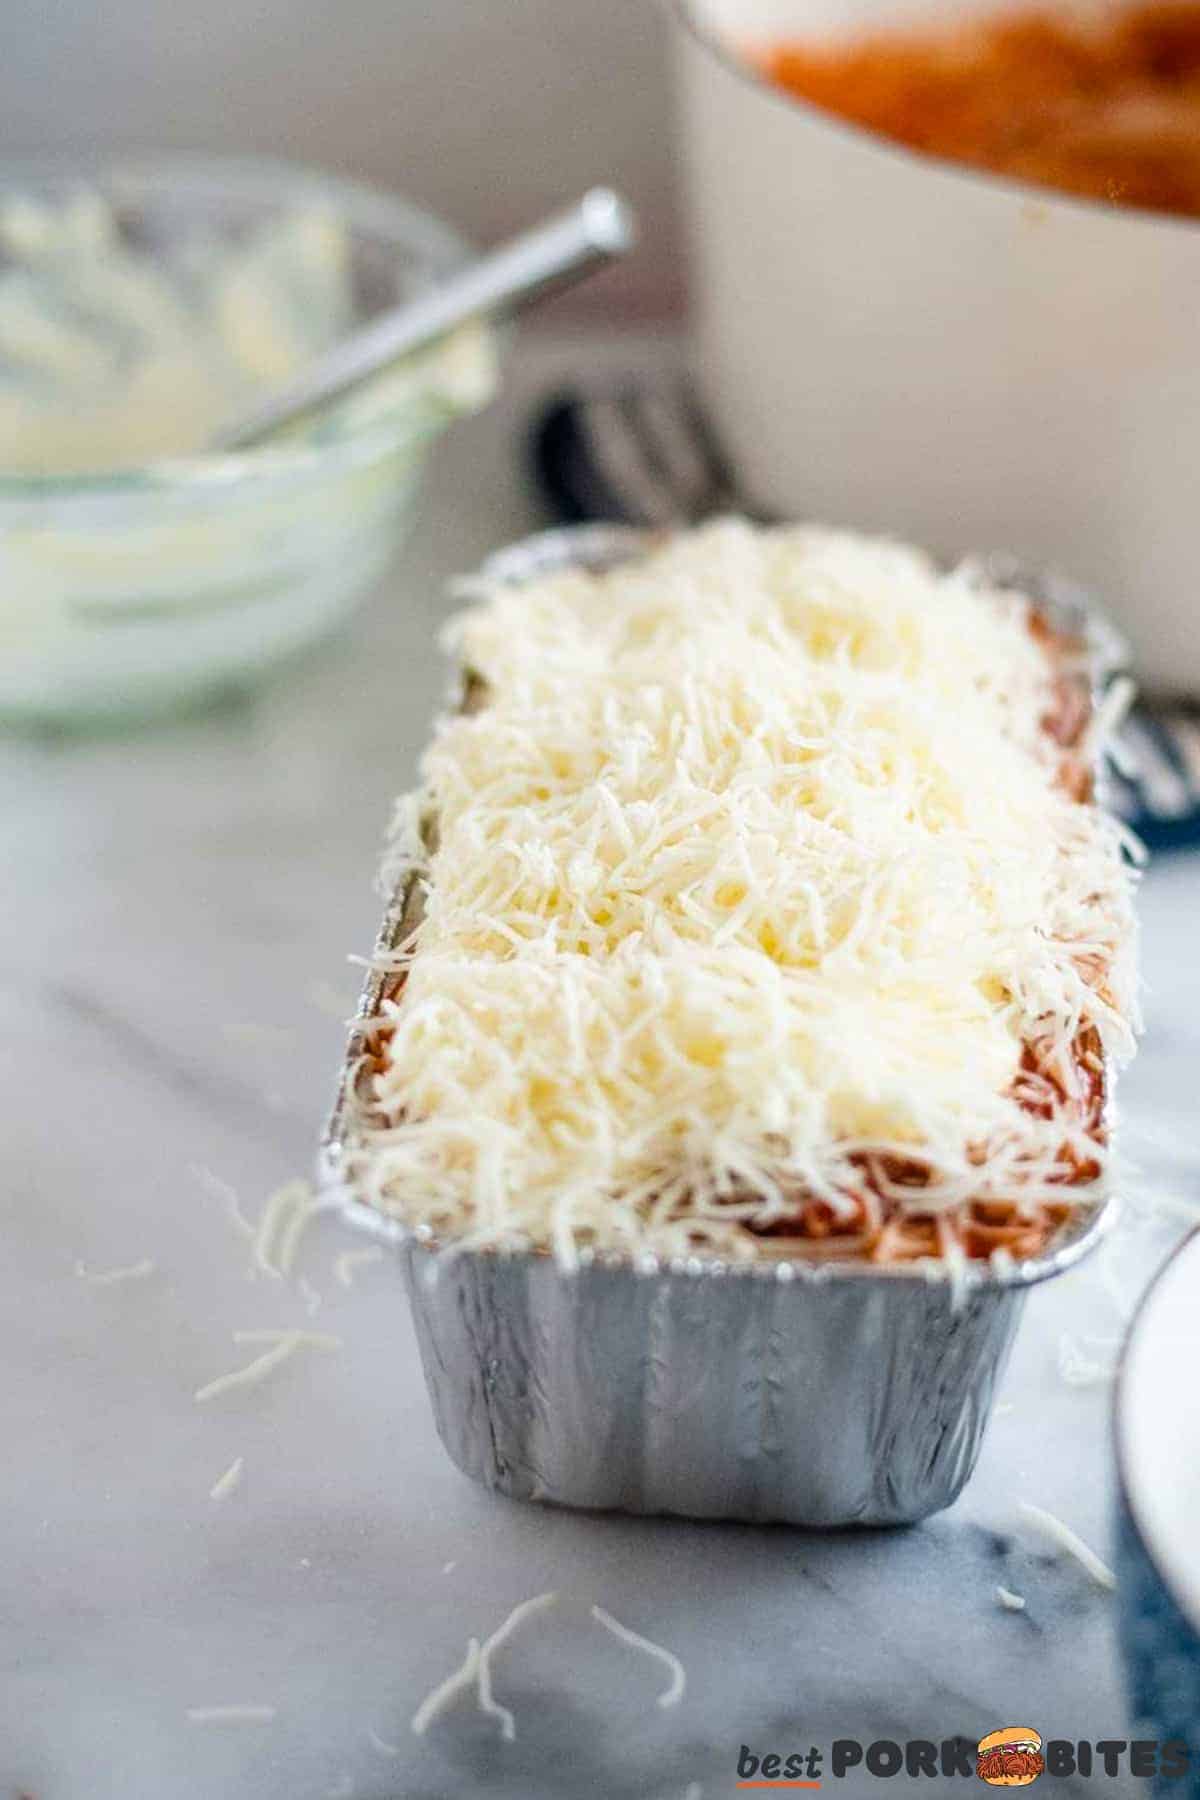 unbaked lasagna in a baking tin covered in mozzarella cheese with bowls in the background